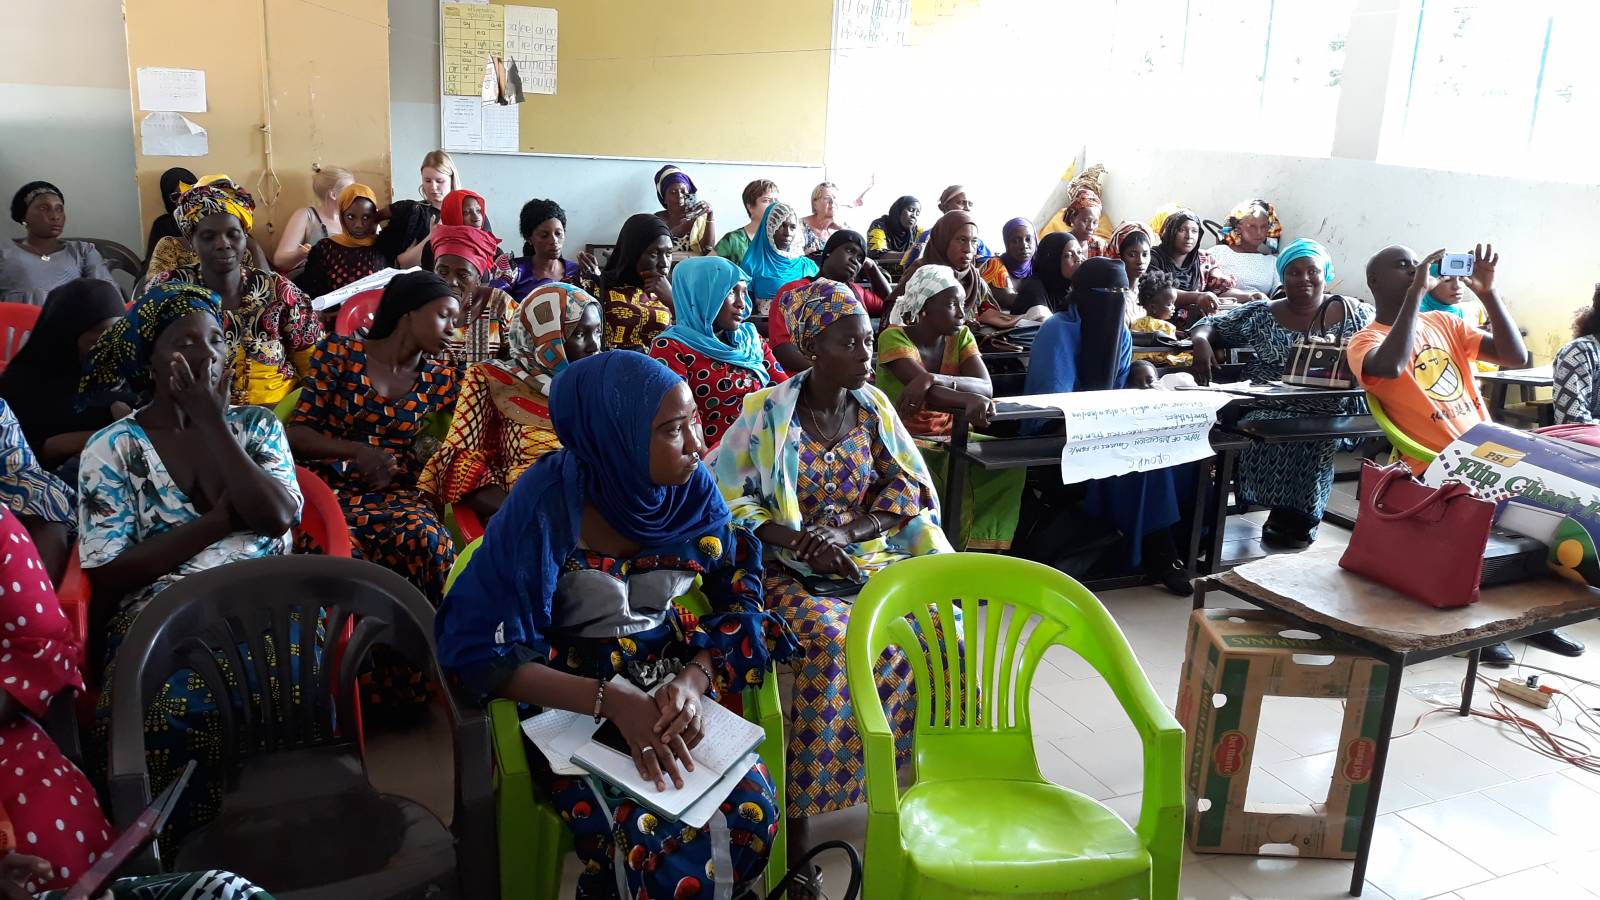 A group of local women listening a lecture of female genital mutilation.